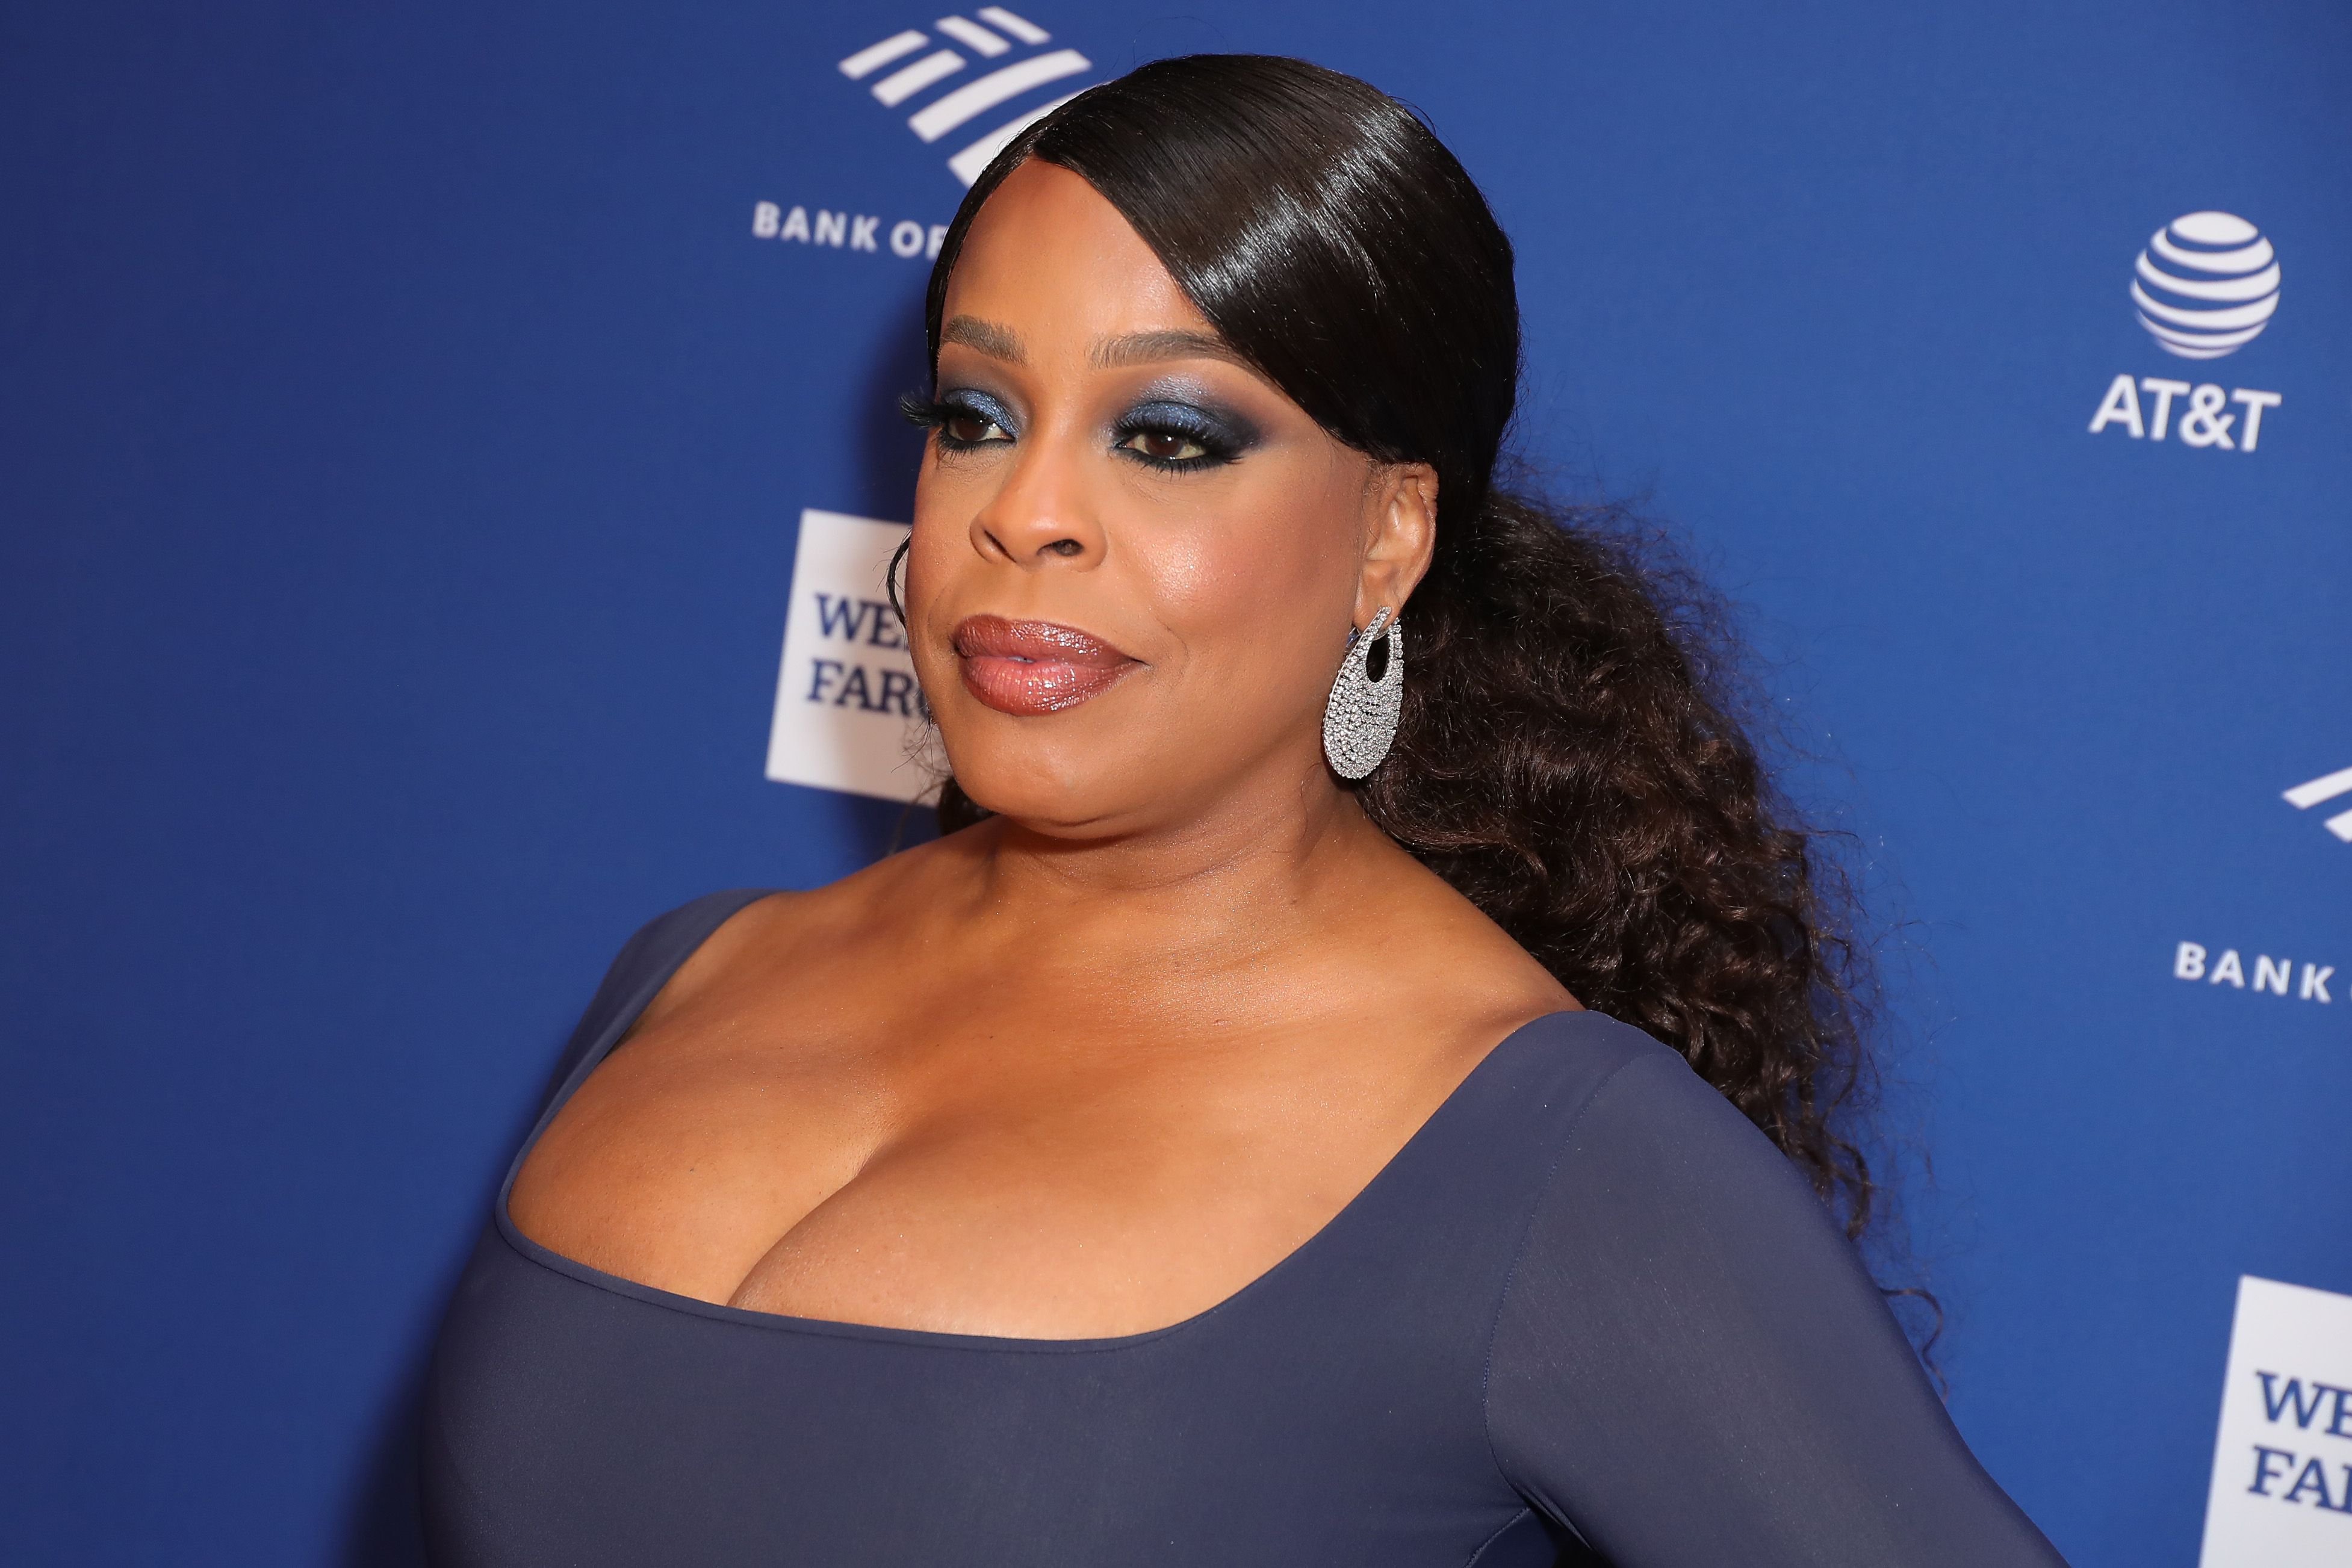 Niecy Nash attends the 51st NAACP Image Awards non-televised awards dinner  on February 21, 2020 in Hollywood, California. | Source: Getty Images